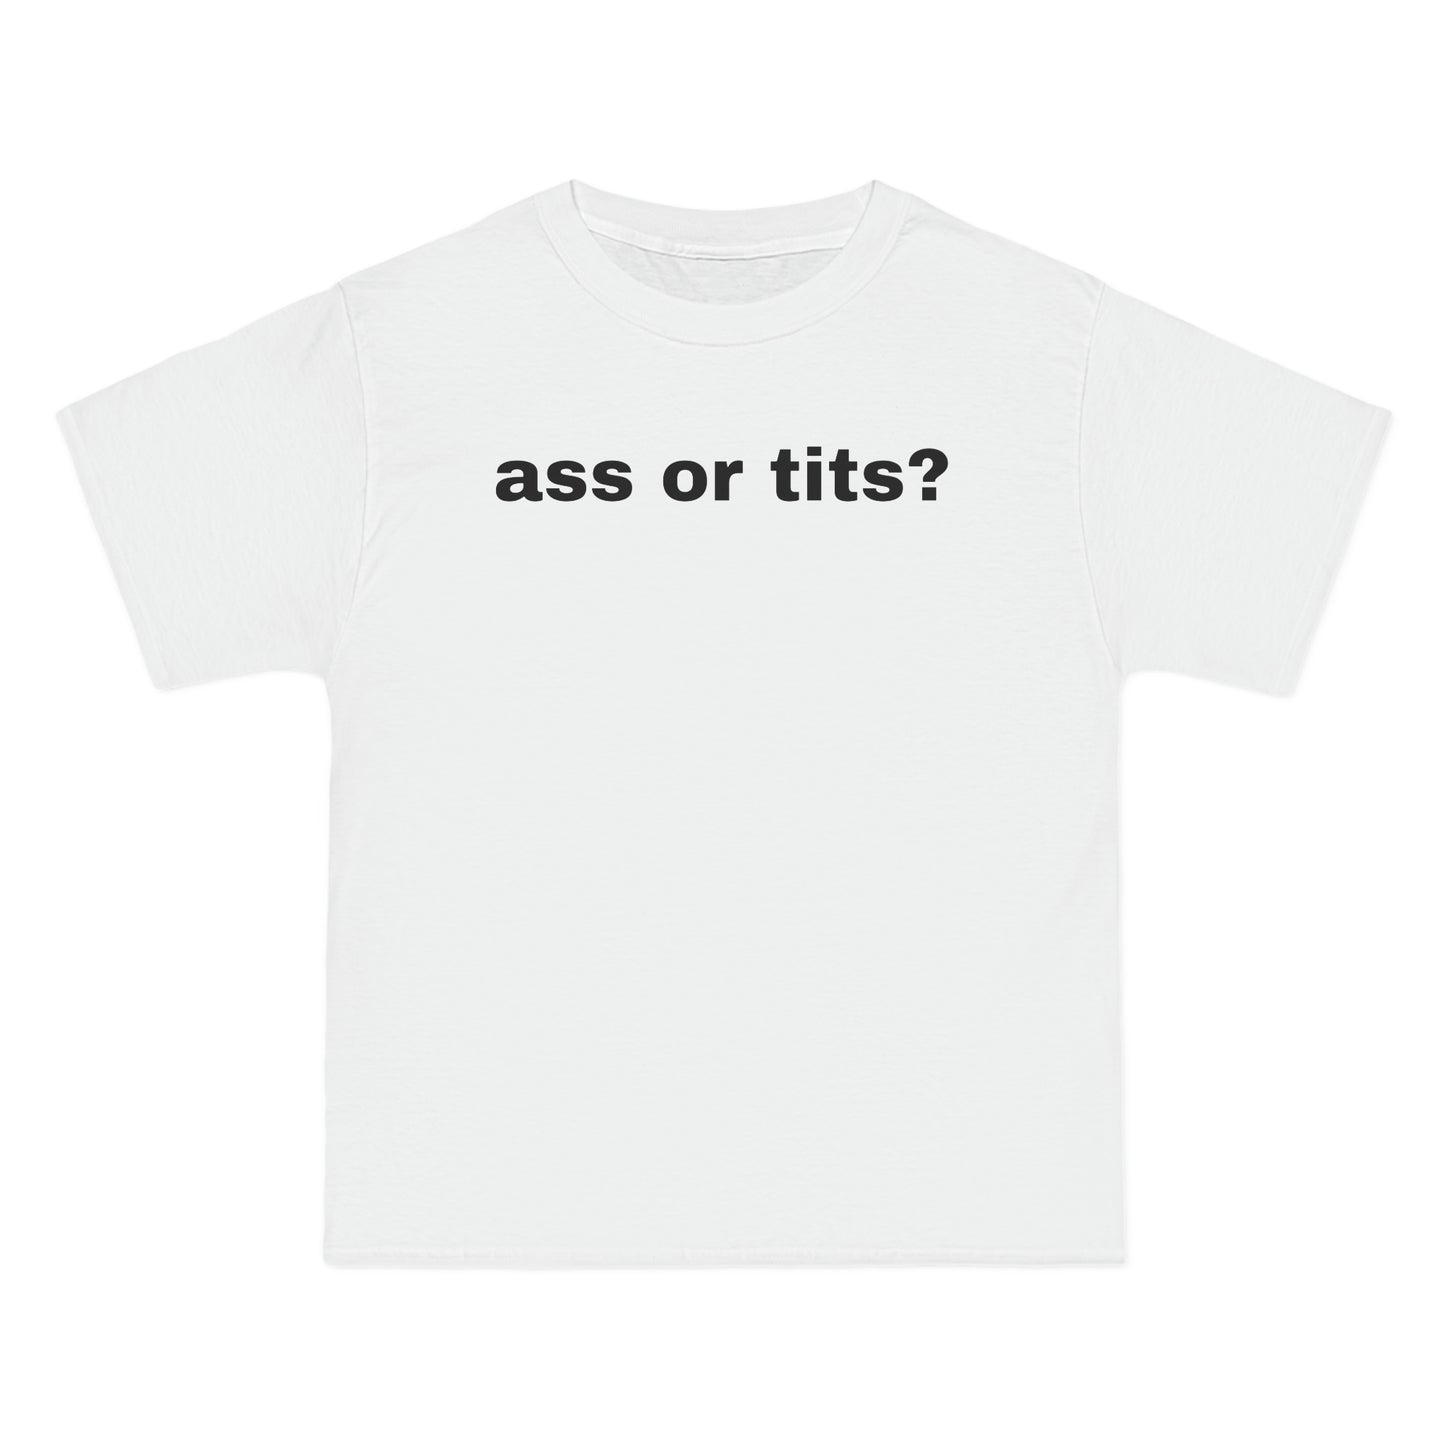 ass or tits? Tee